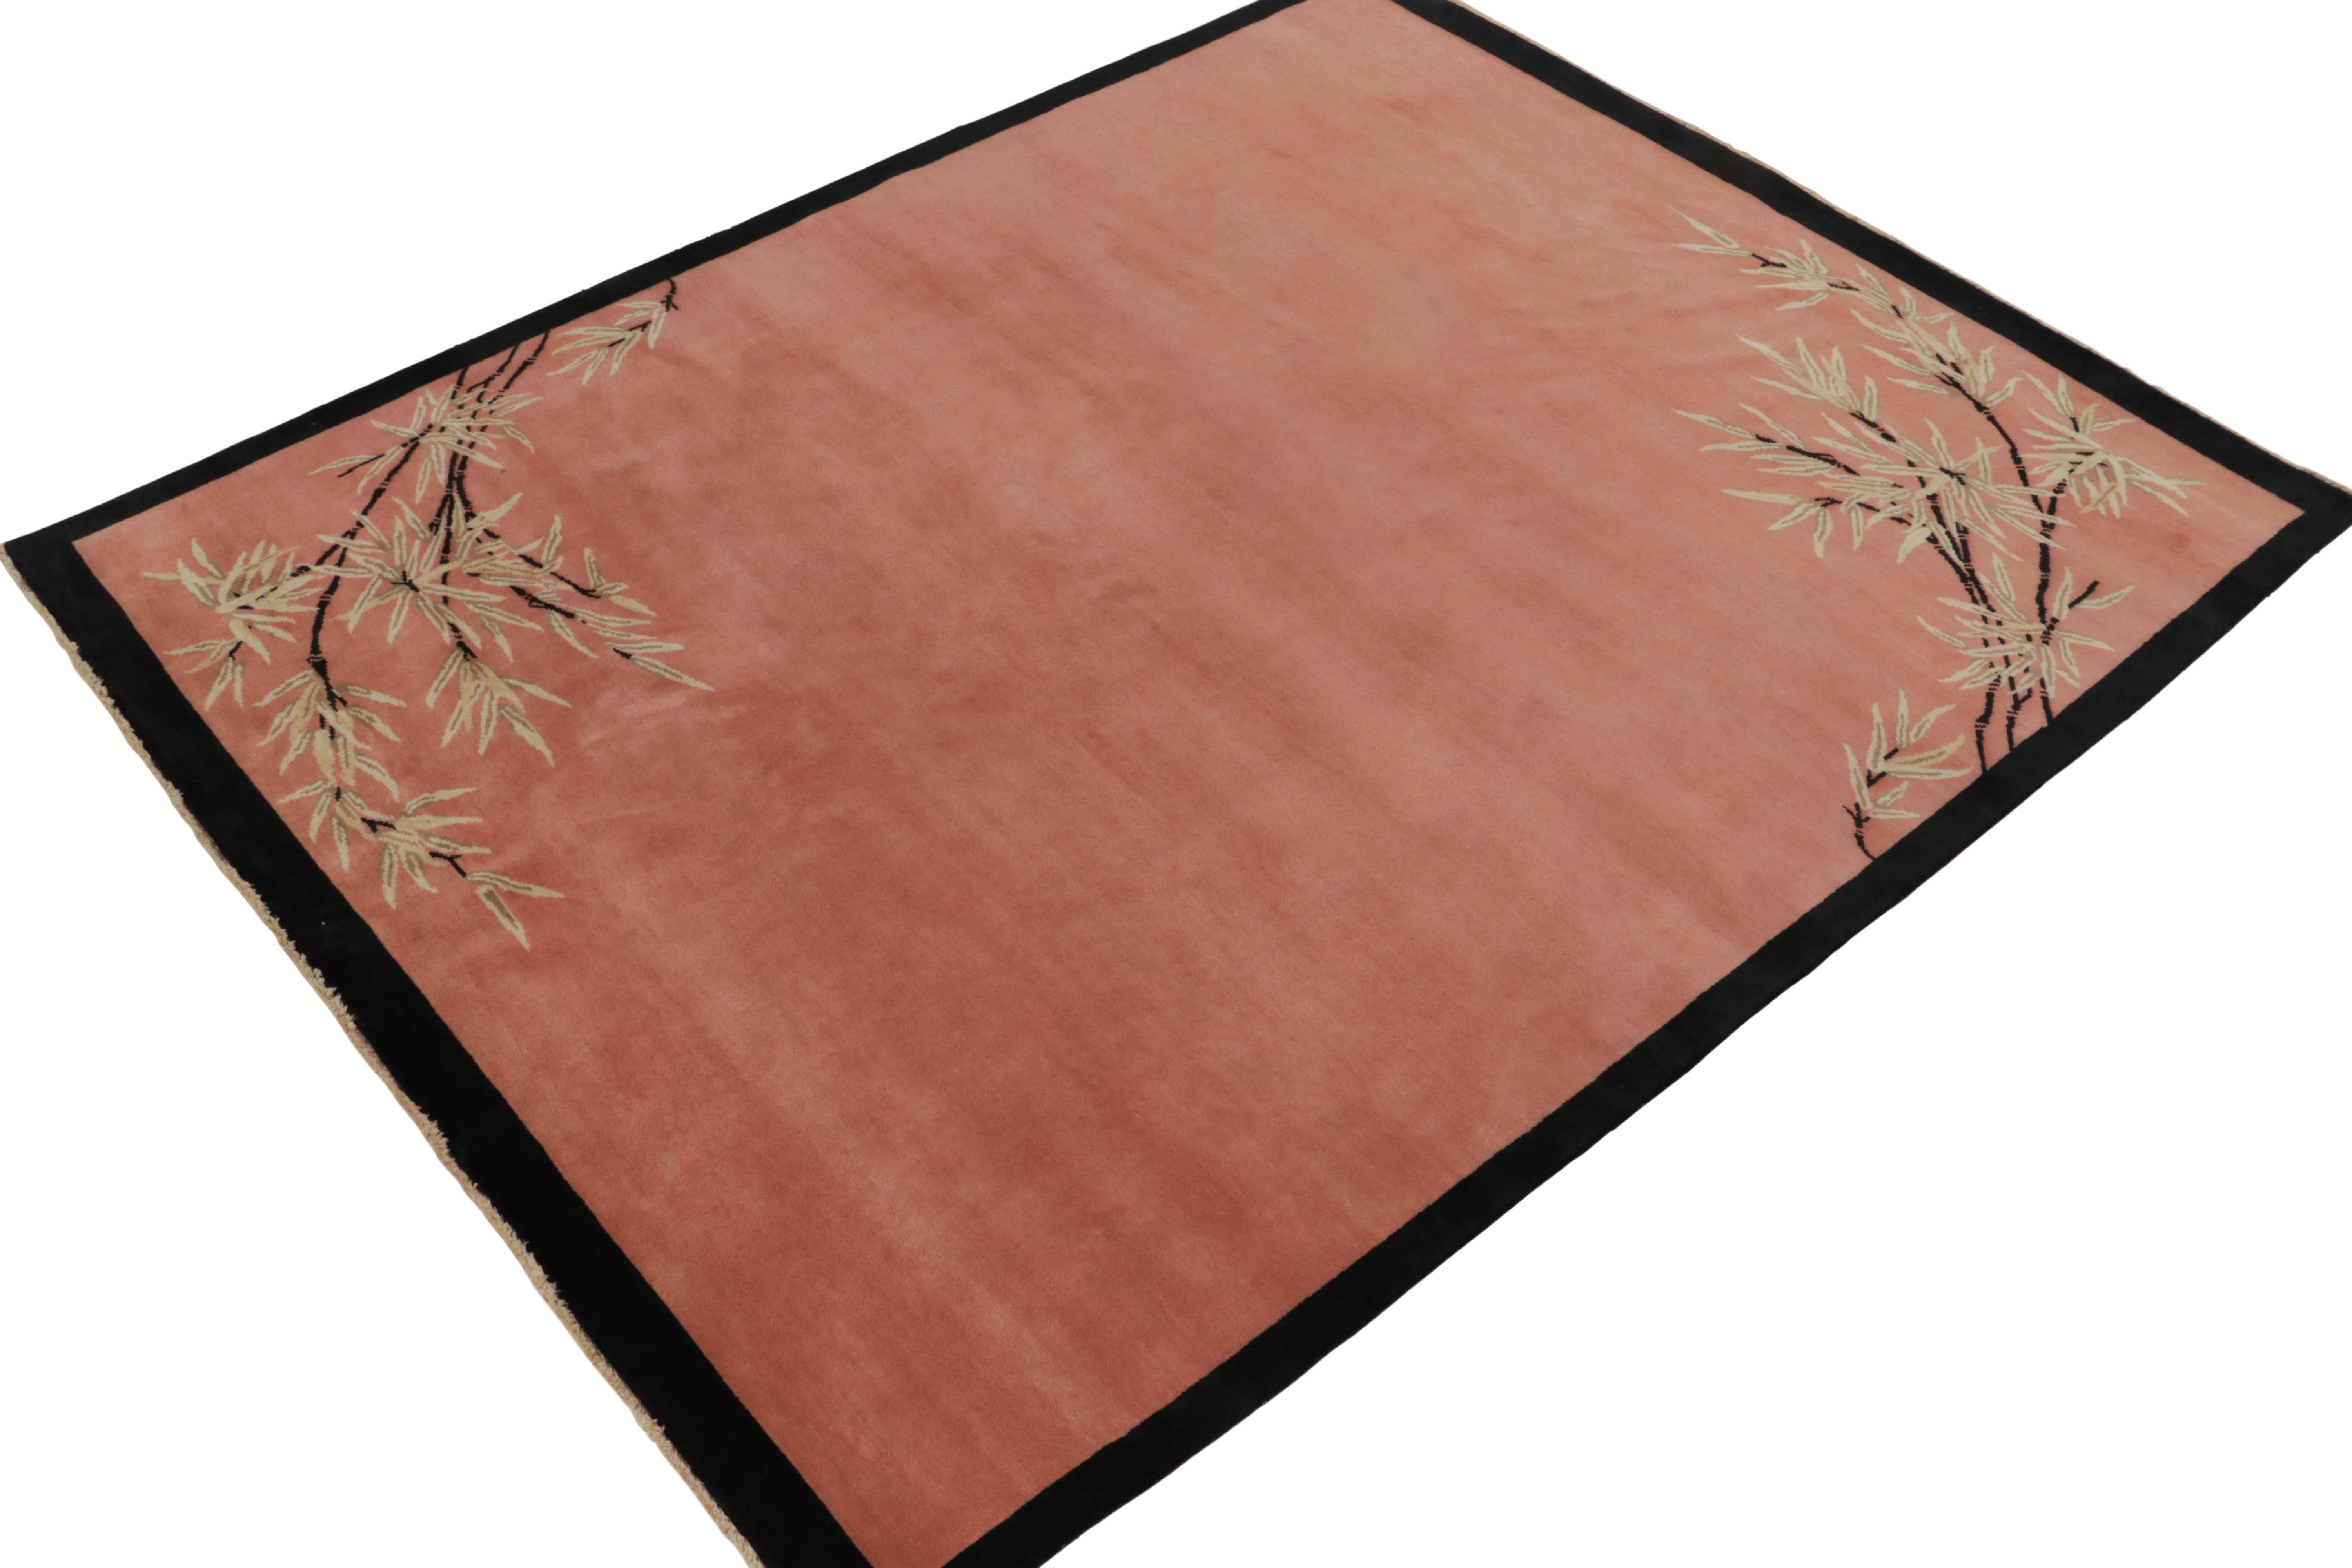 Hand-knotted in luscious wool, an 8x10 Art Deco rug, inspired by Chinese sensibilities of the 1920s. 

On the Design: Soft pink tones marry the sheen of wool for an especially alluring luster in a healthy pile. The pattern depicts florals in